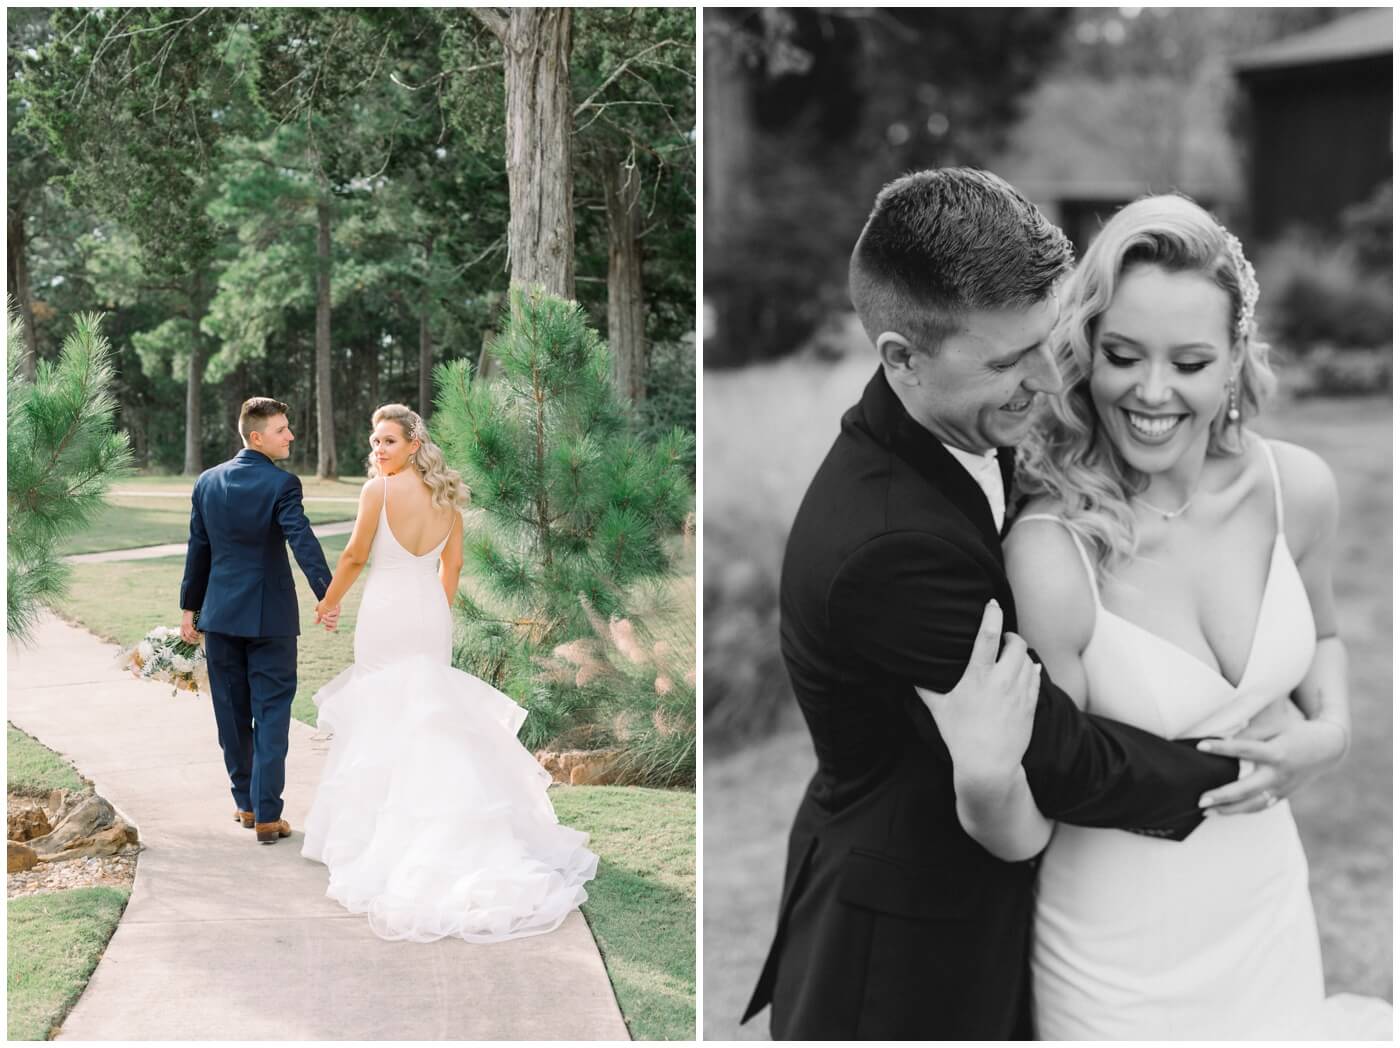 Houston Wedding at The Vine | the bride and groom are laughing together as they hug